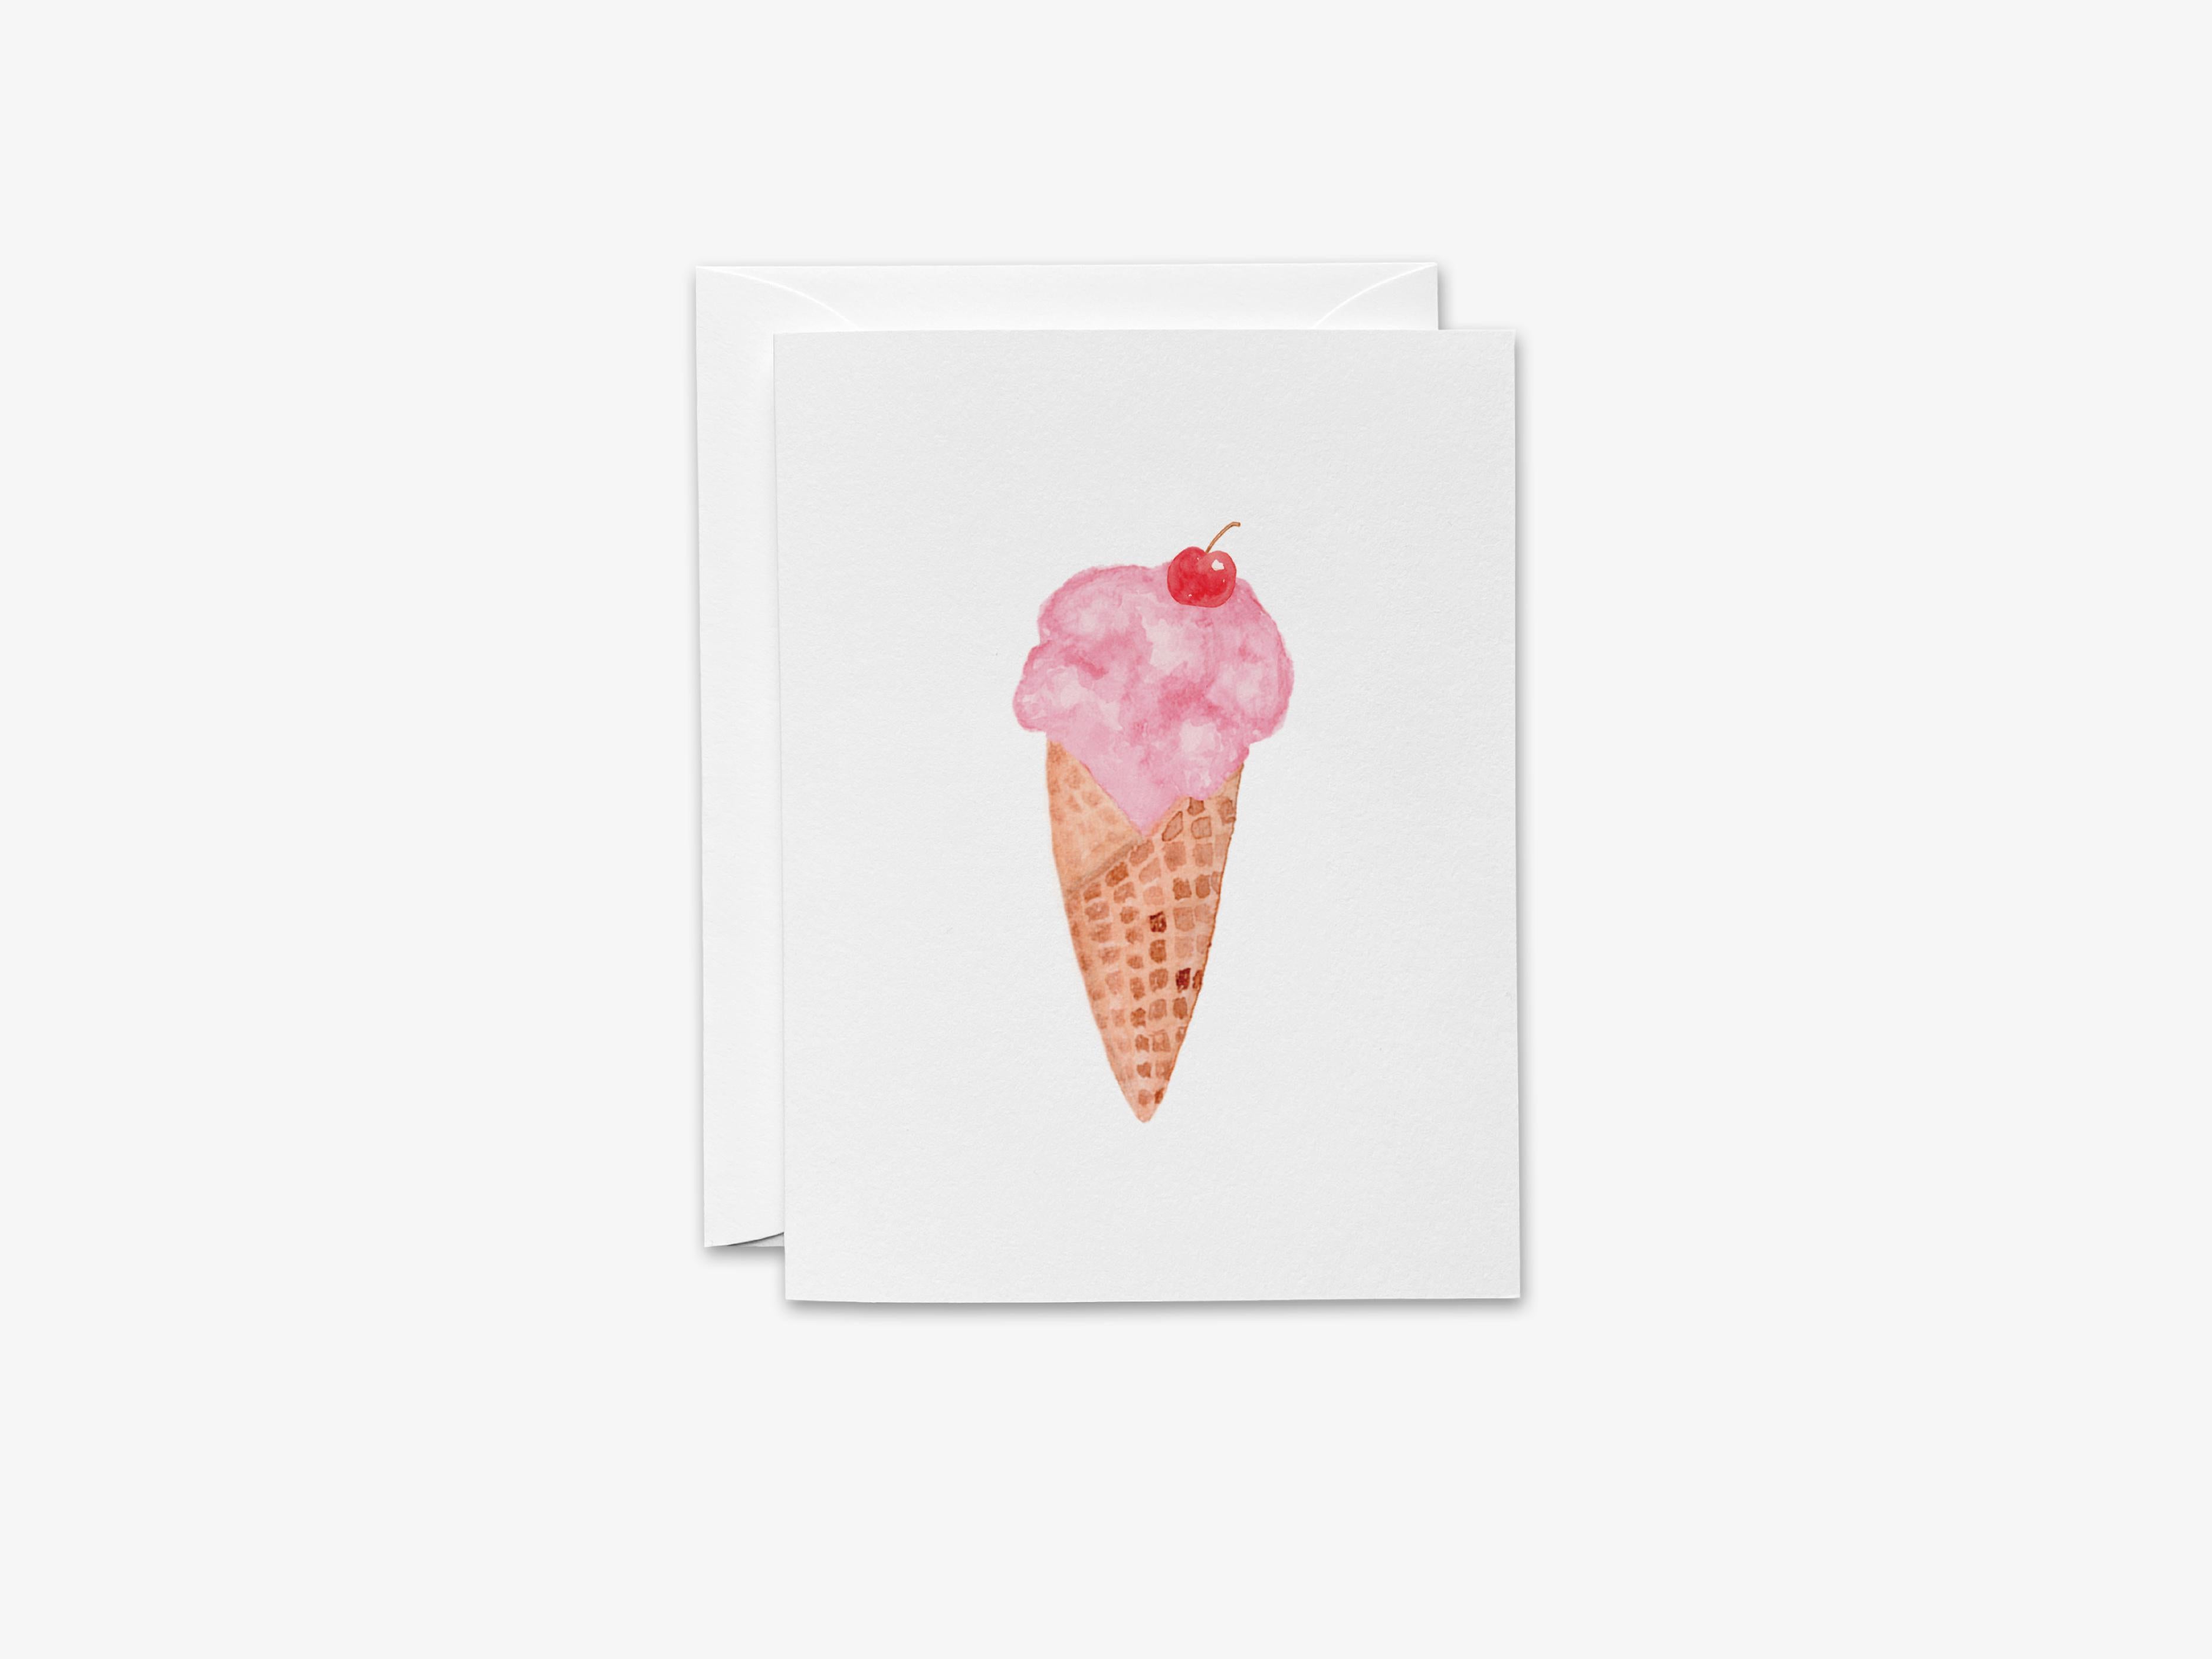 Ice Cream Cone Greeting Card-These folded greeting cards 4.25x5.5 and feature our hand-painted ice cream cone, printed in the USA on 100lb textured stock. They come with a White envelope and make a great birthday card for the sweet tooth lover in your life.-The Singing Little Bird